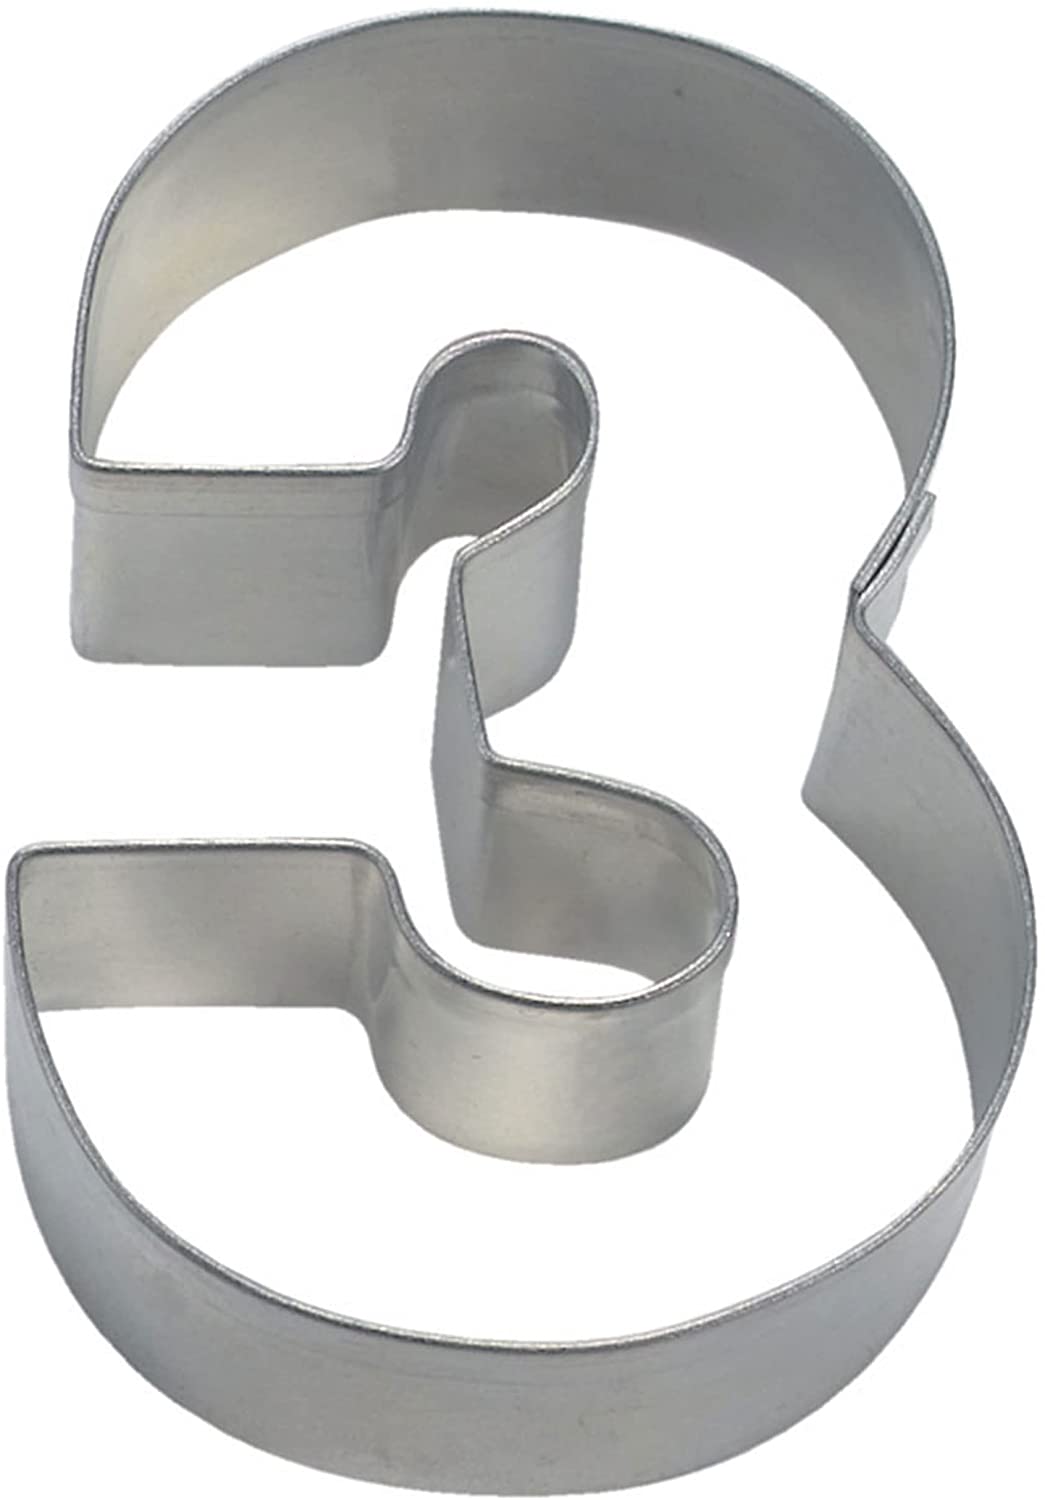 Staedter Cookie Cutter Number 3, Stainless Steel, 6.5 Cm